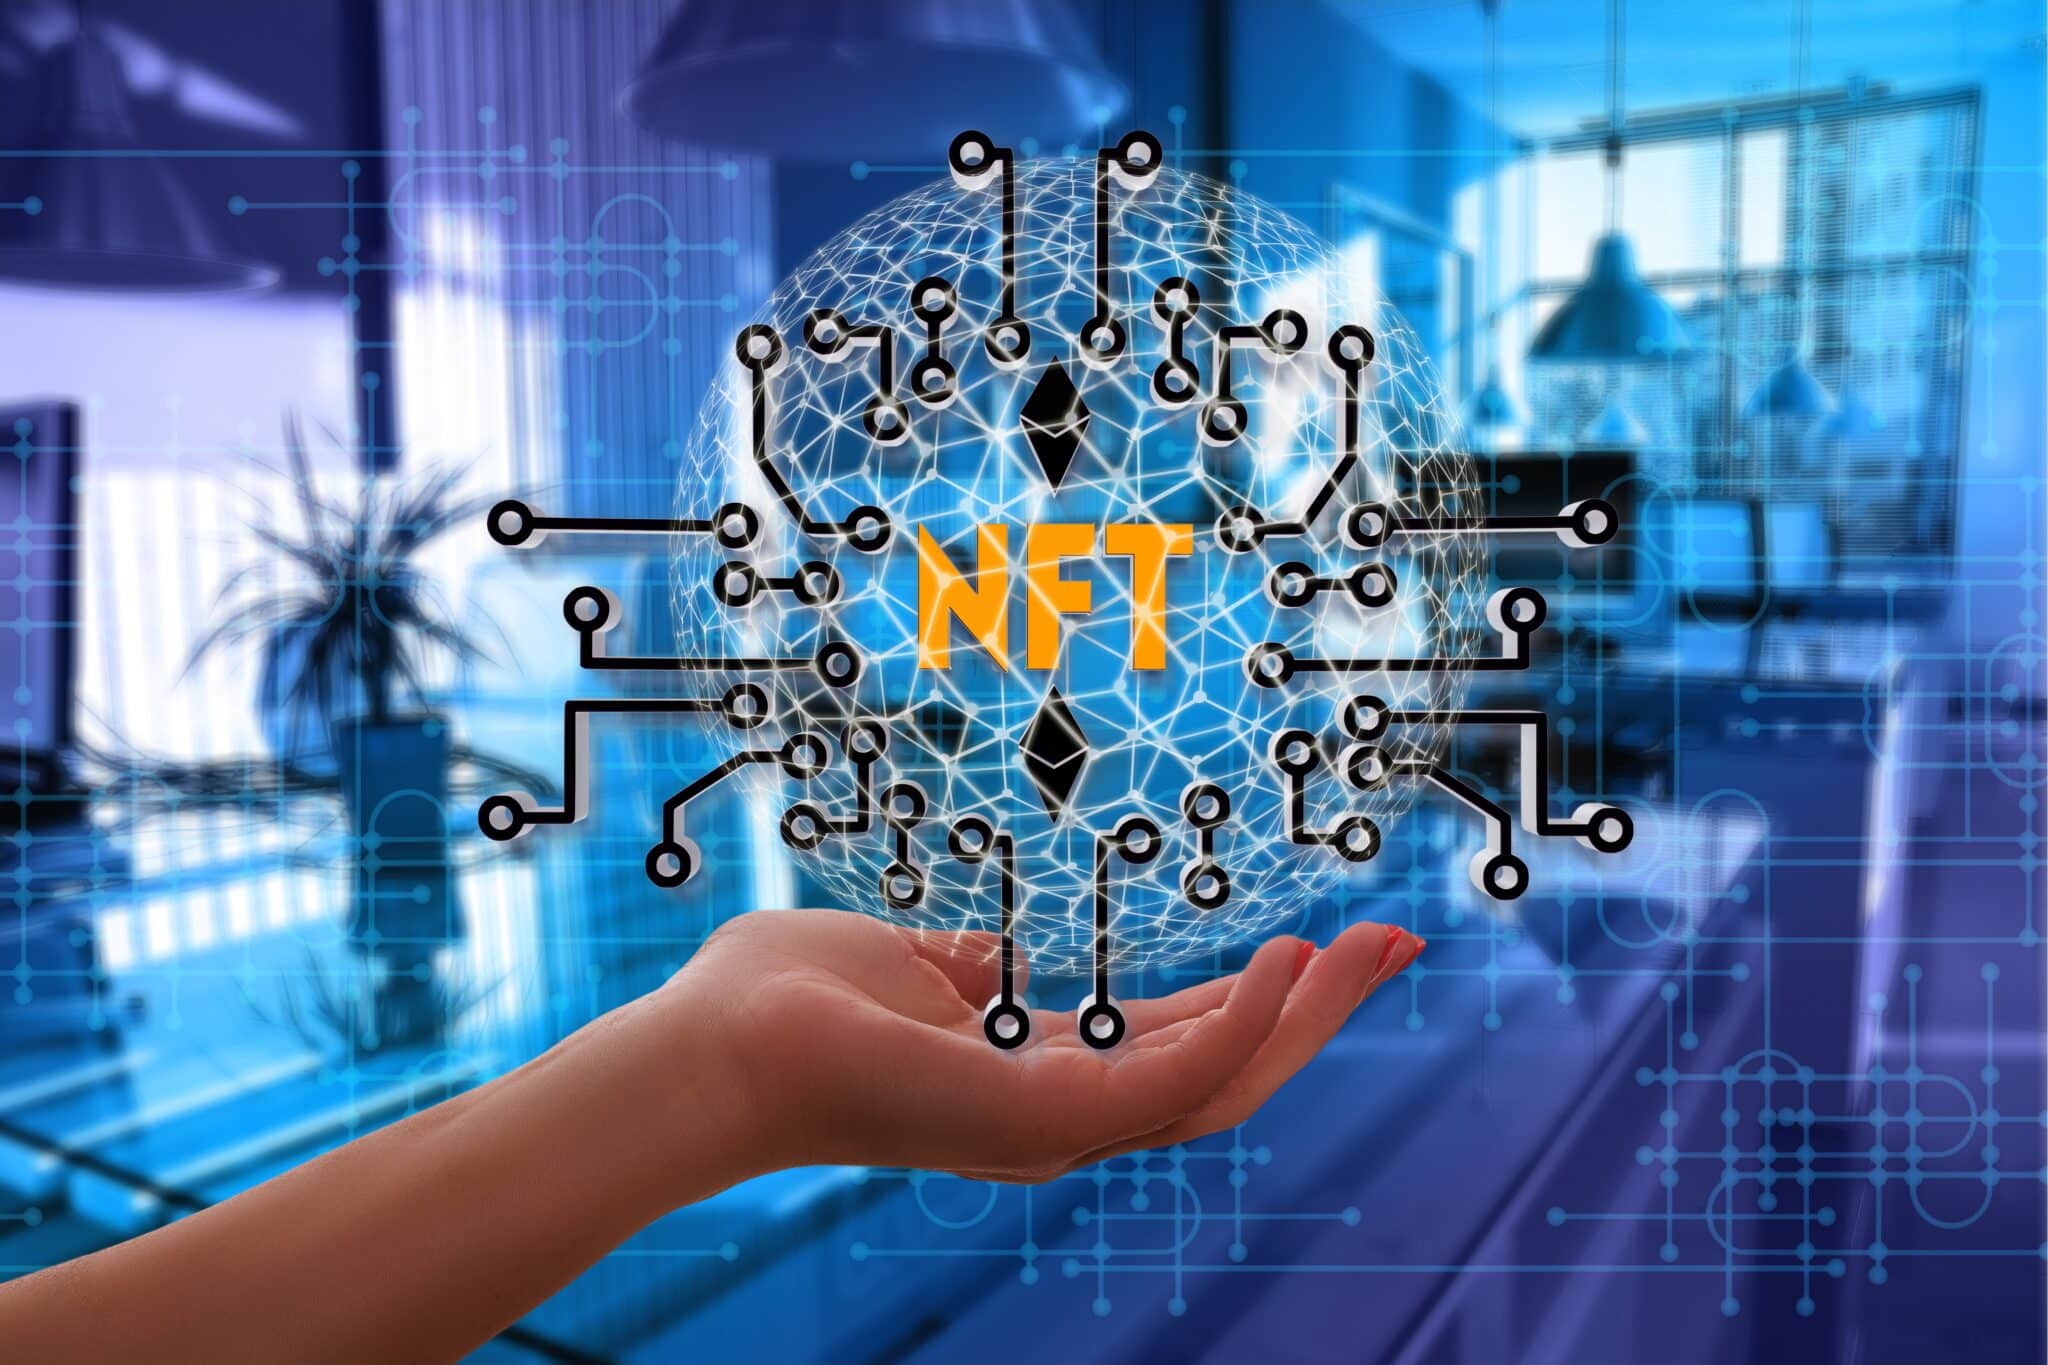 nft, non-fungible token, typography